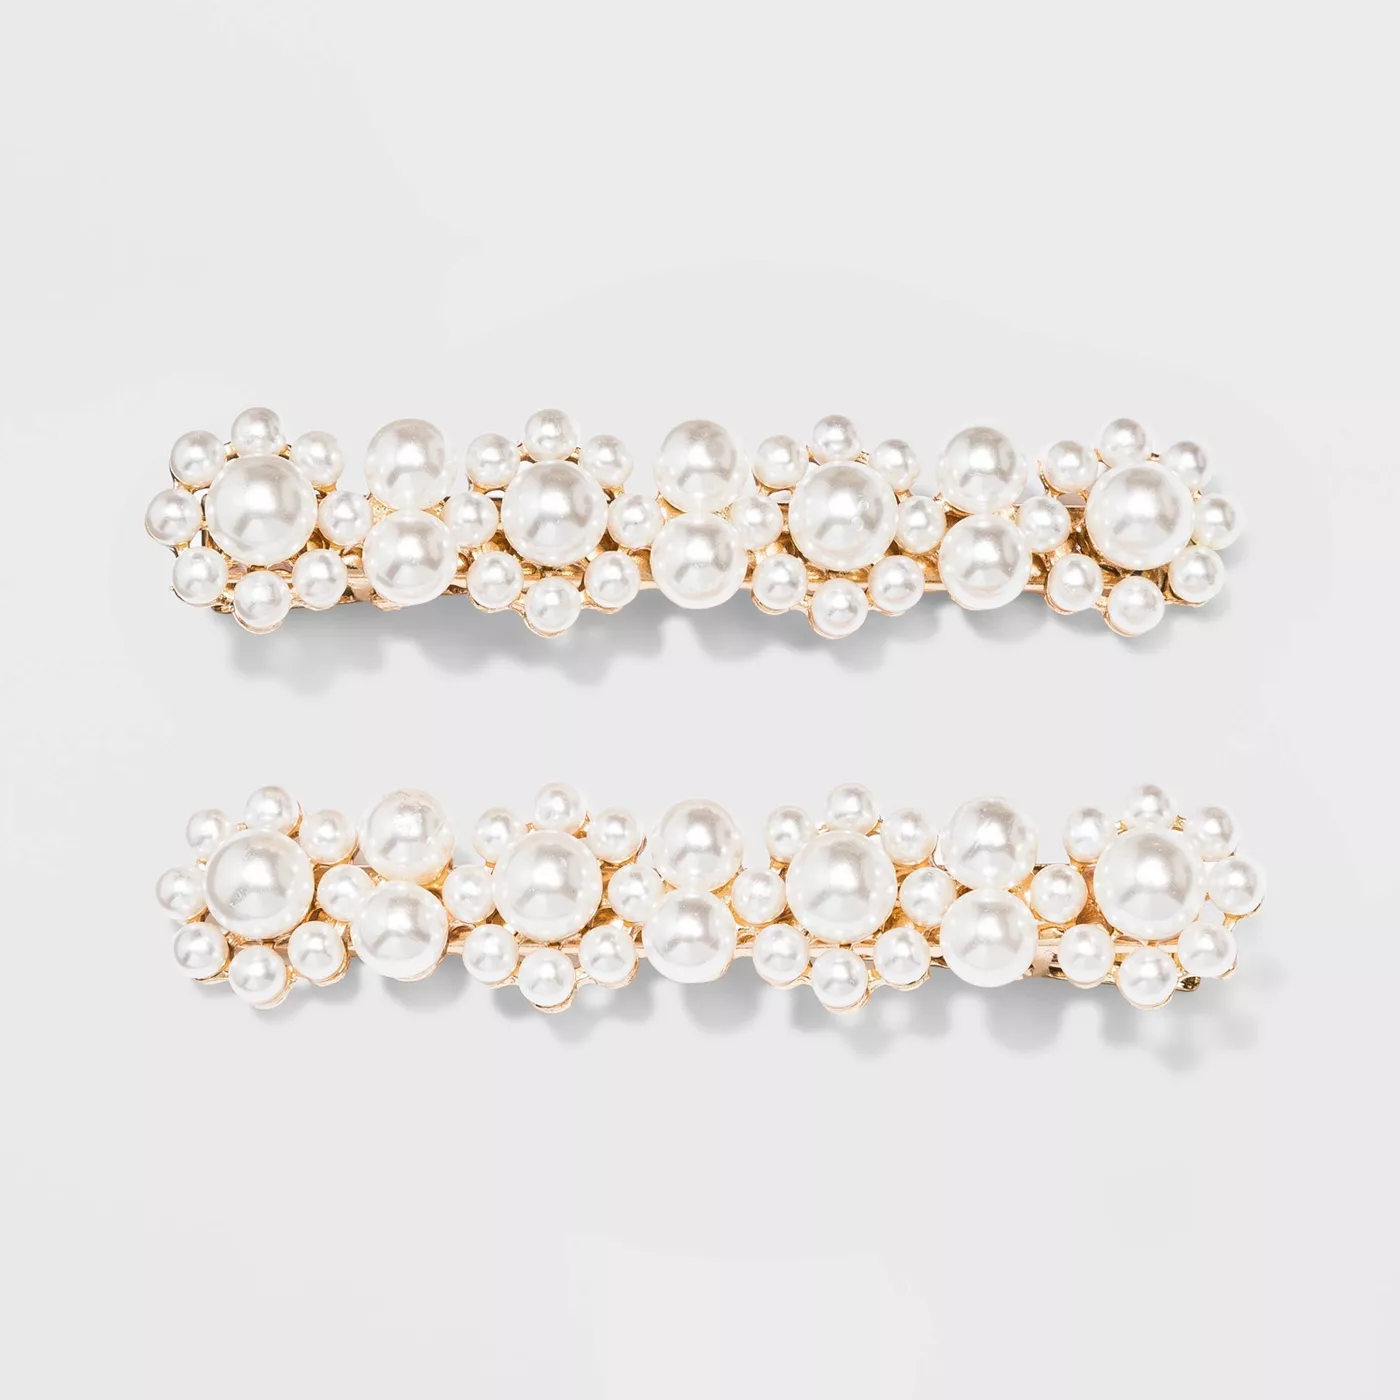 Cultured Pearl Hair Clips 2pc - A New Day™ White - image 1 of 7